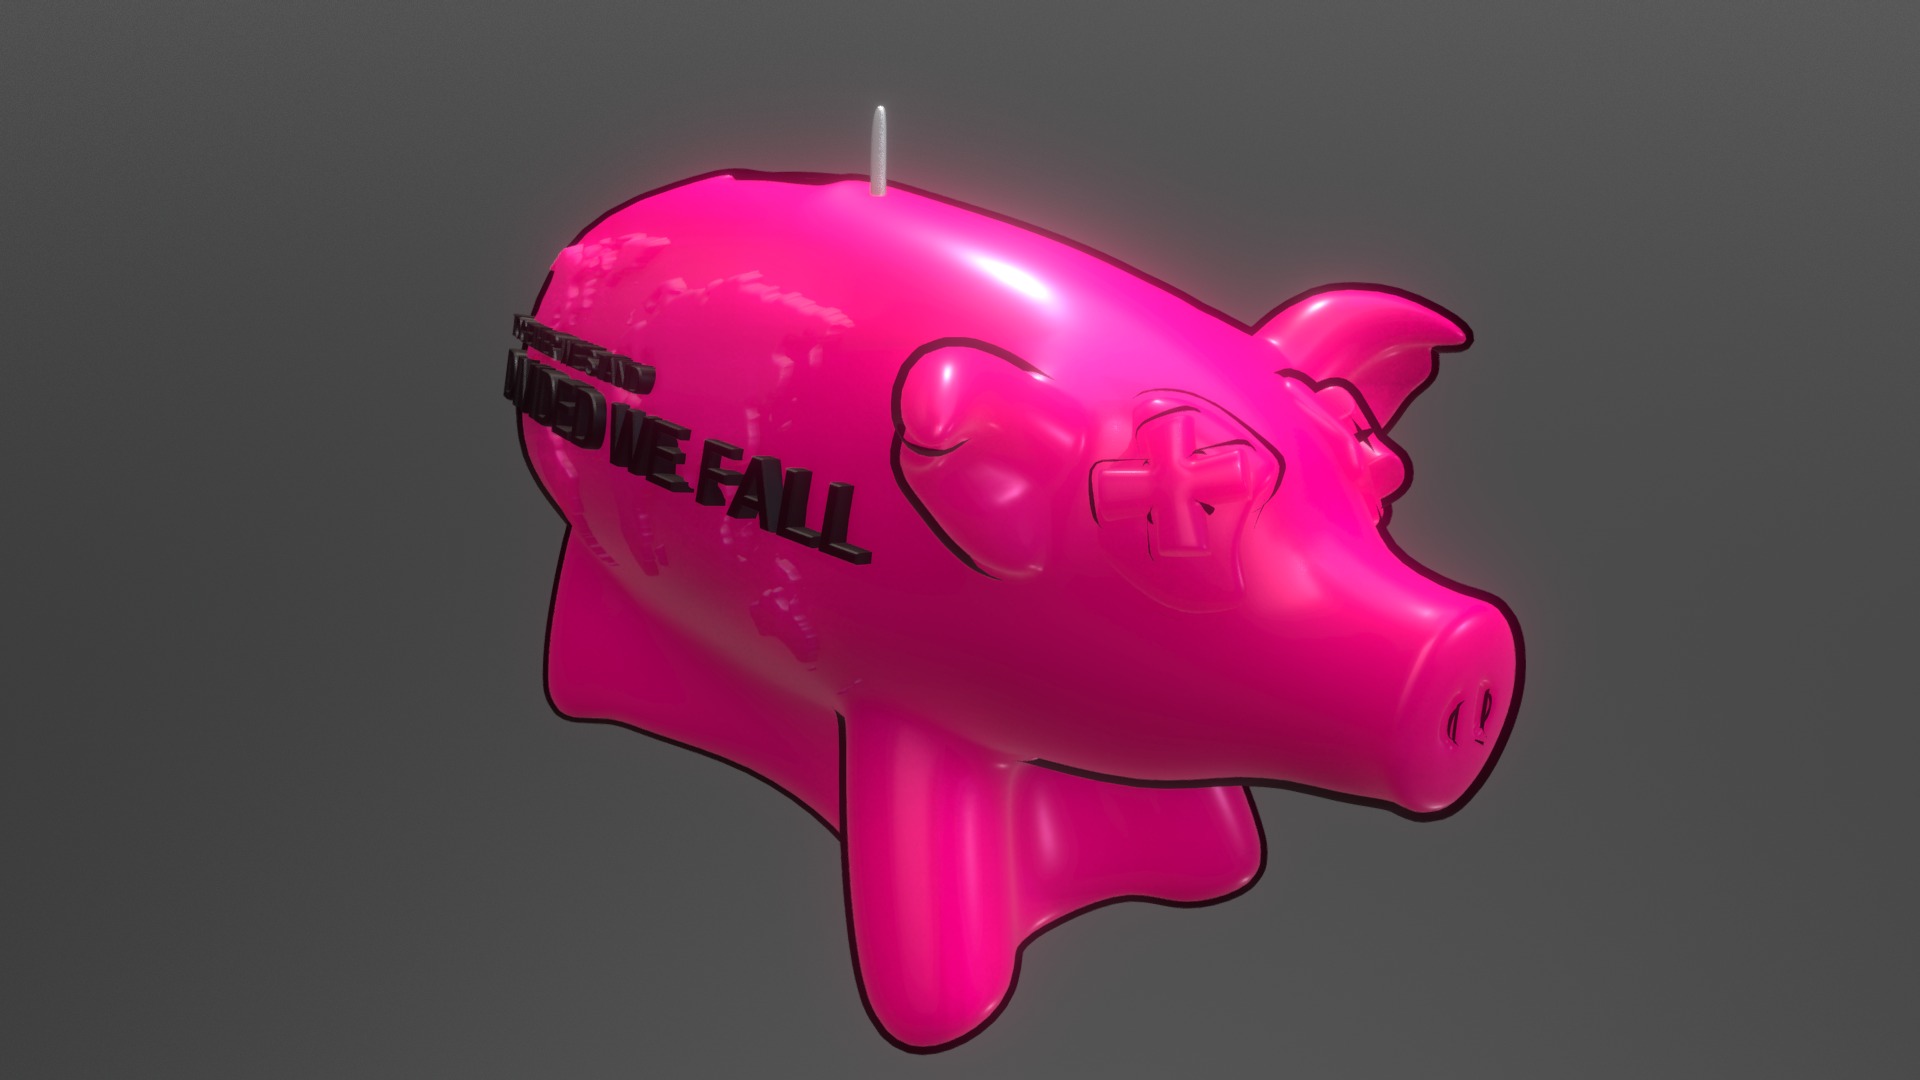 3D model Roger Waters Pig of War - This is a 3D model of the Roger Waters Pig of War. The 3D model is about a pink plastic toy.